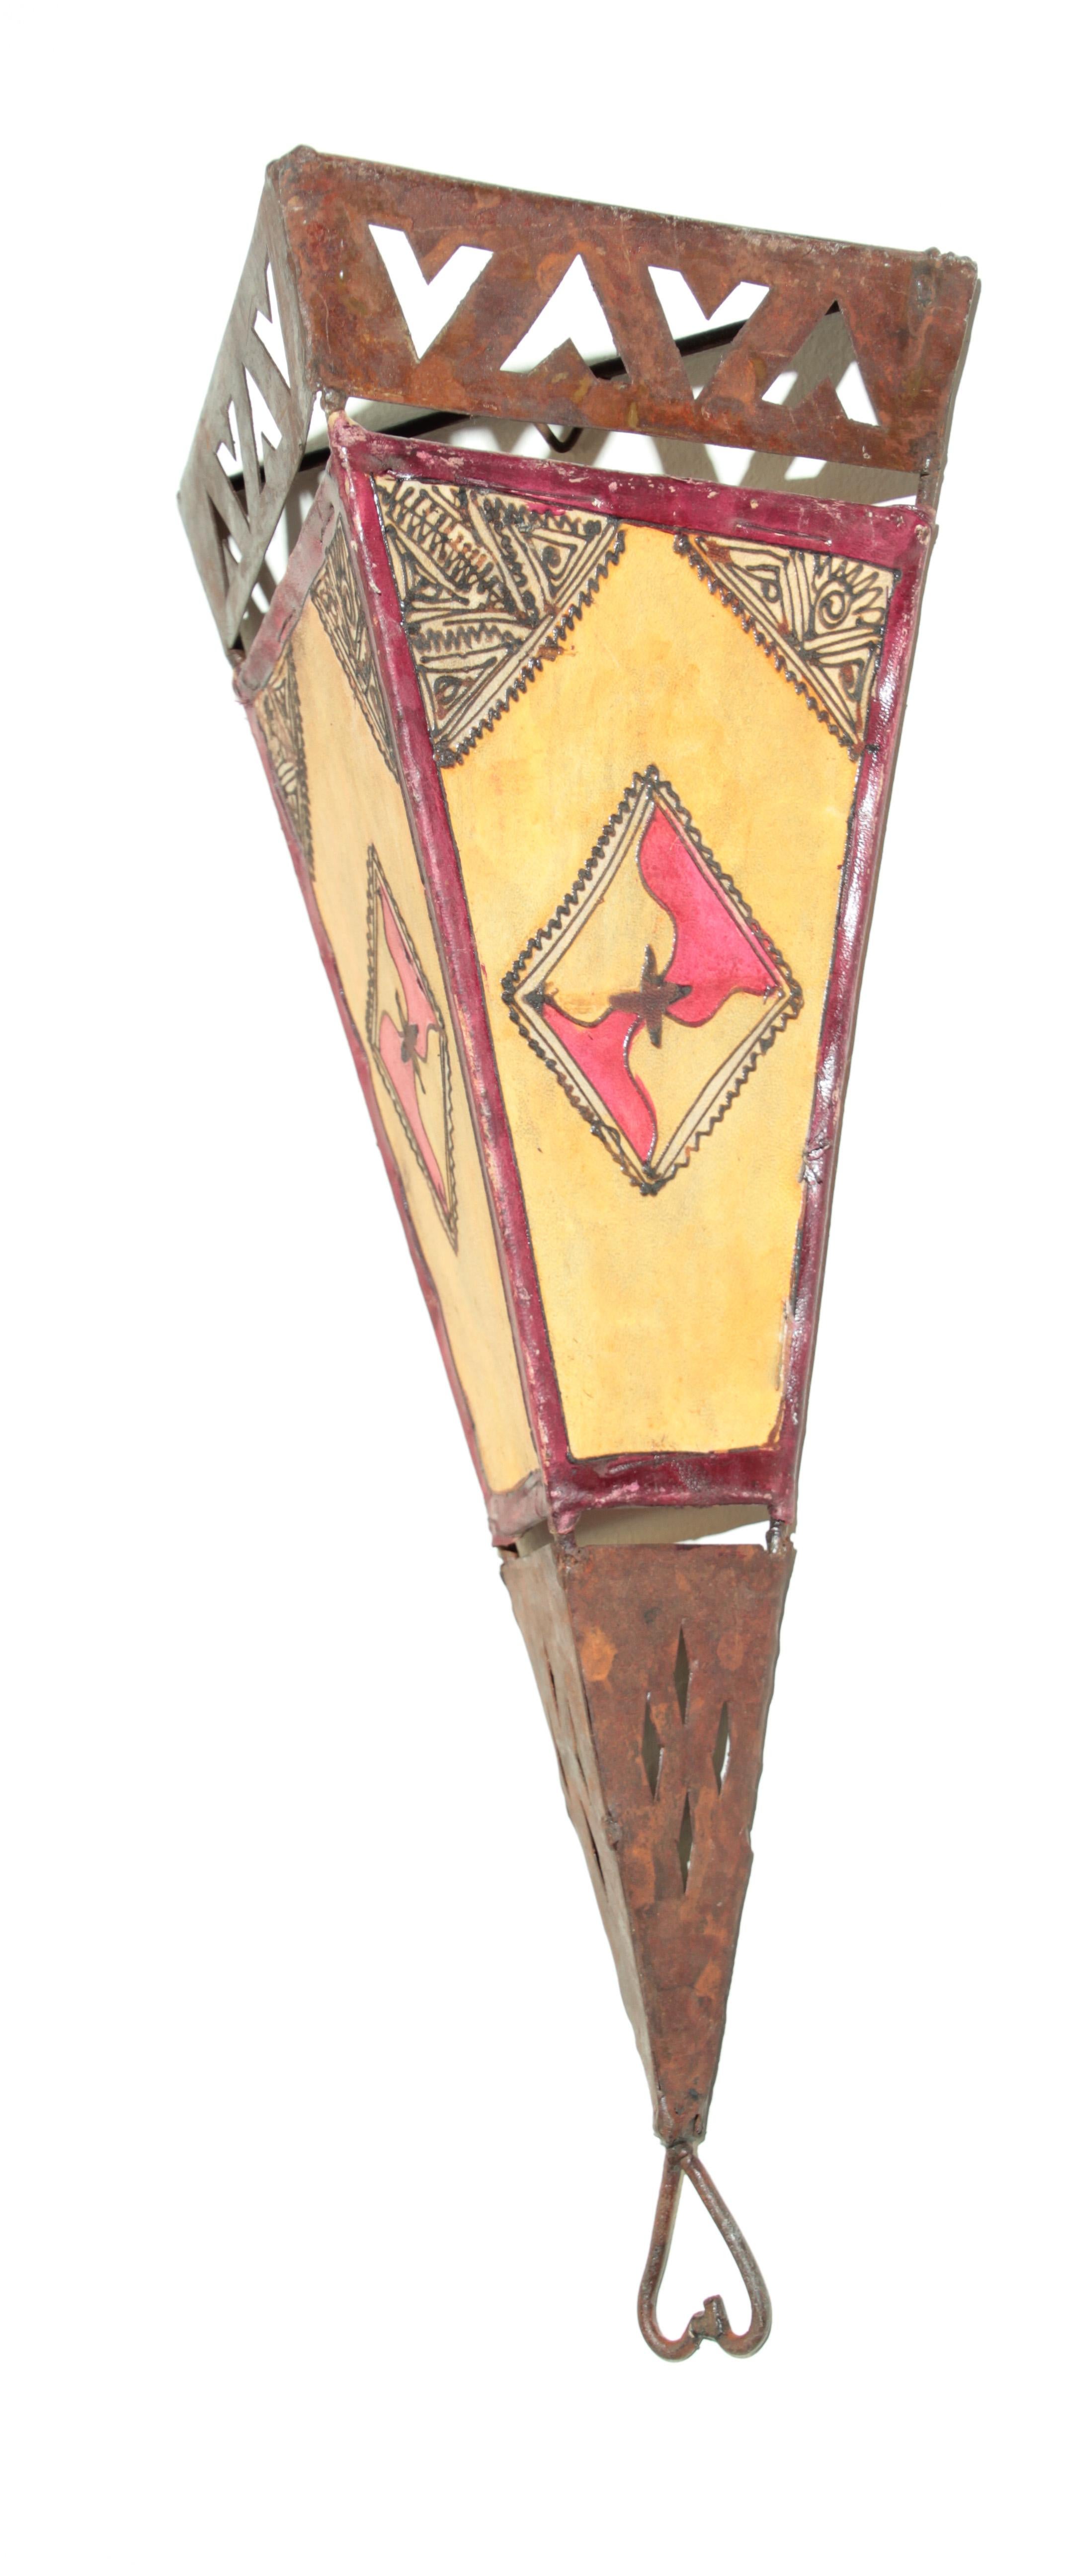 Large African Tribal Art parchment wall shade sconce featuring a large triangle hide form stitched on iron and hand painted surface.
These ethnic Art pieces could be used as wall lamp shade or decorative wall hanging.
Great folk art African Moroccan